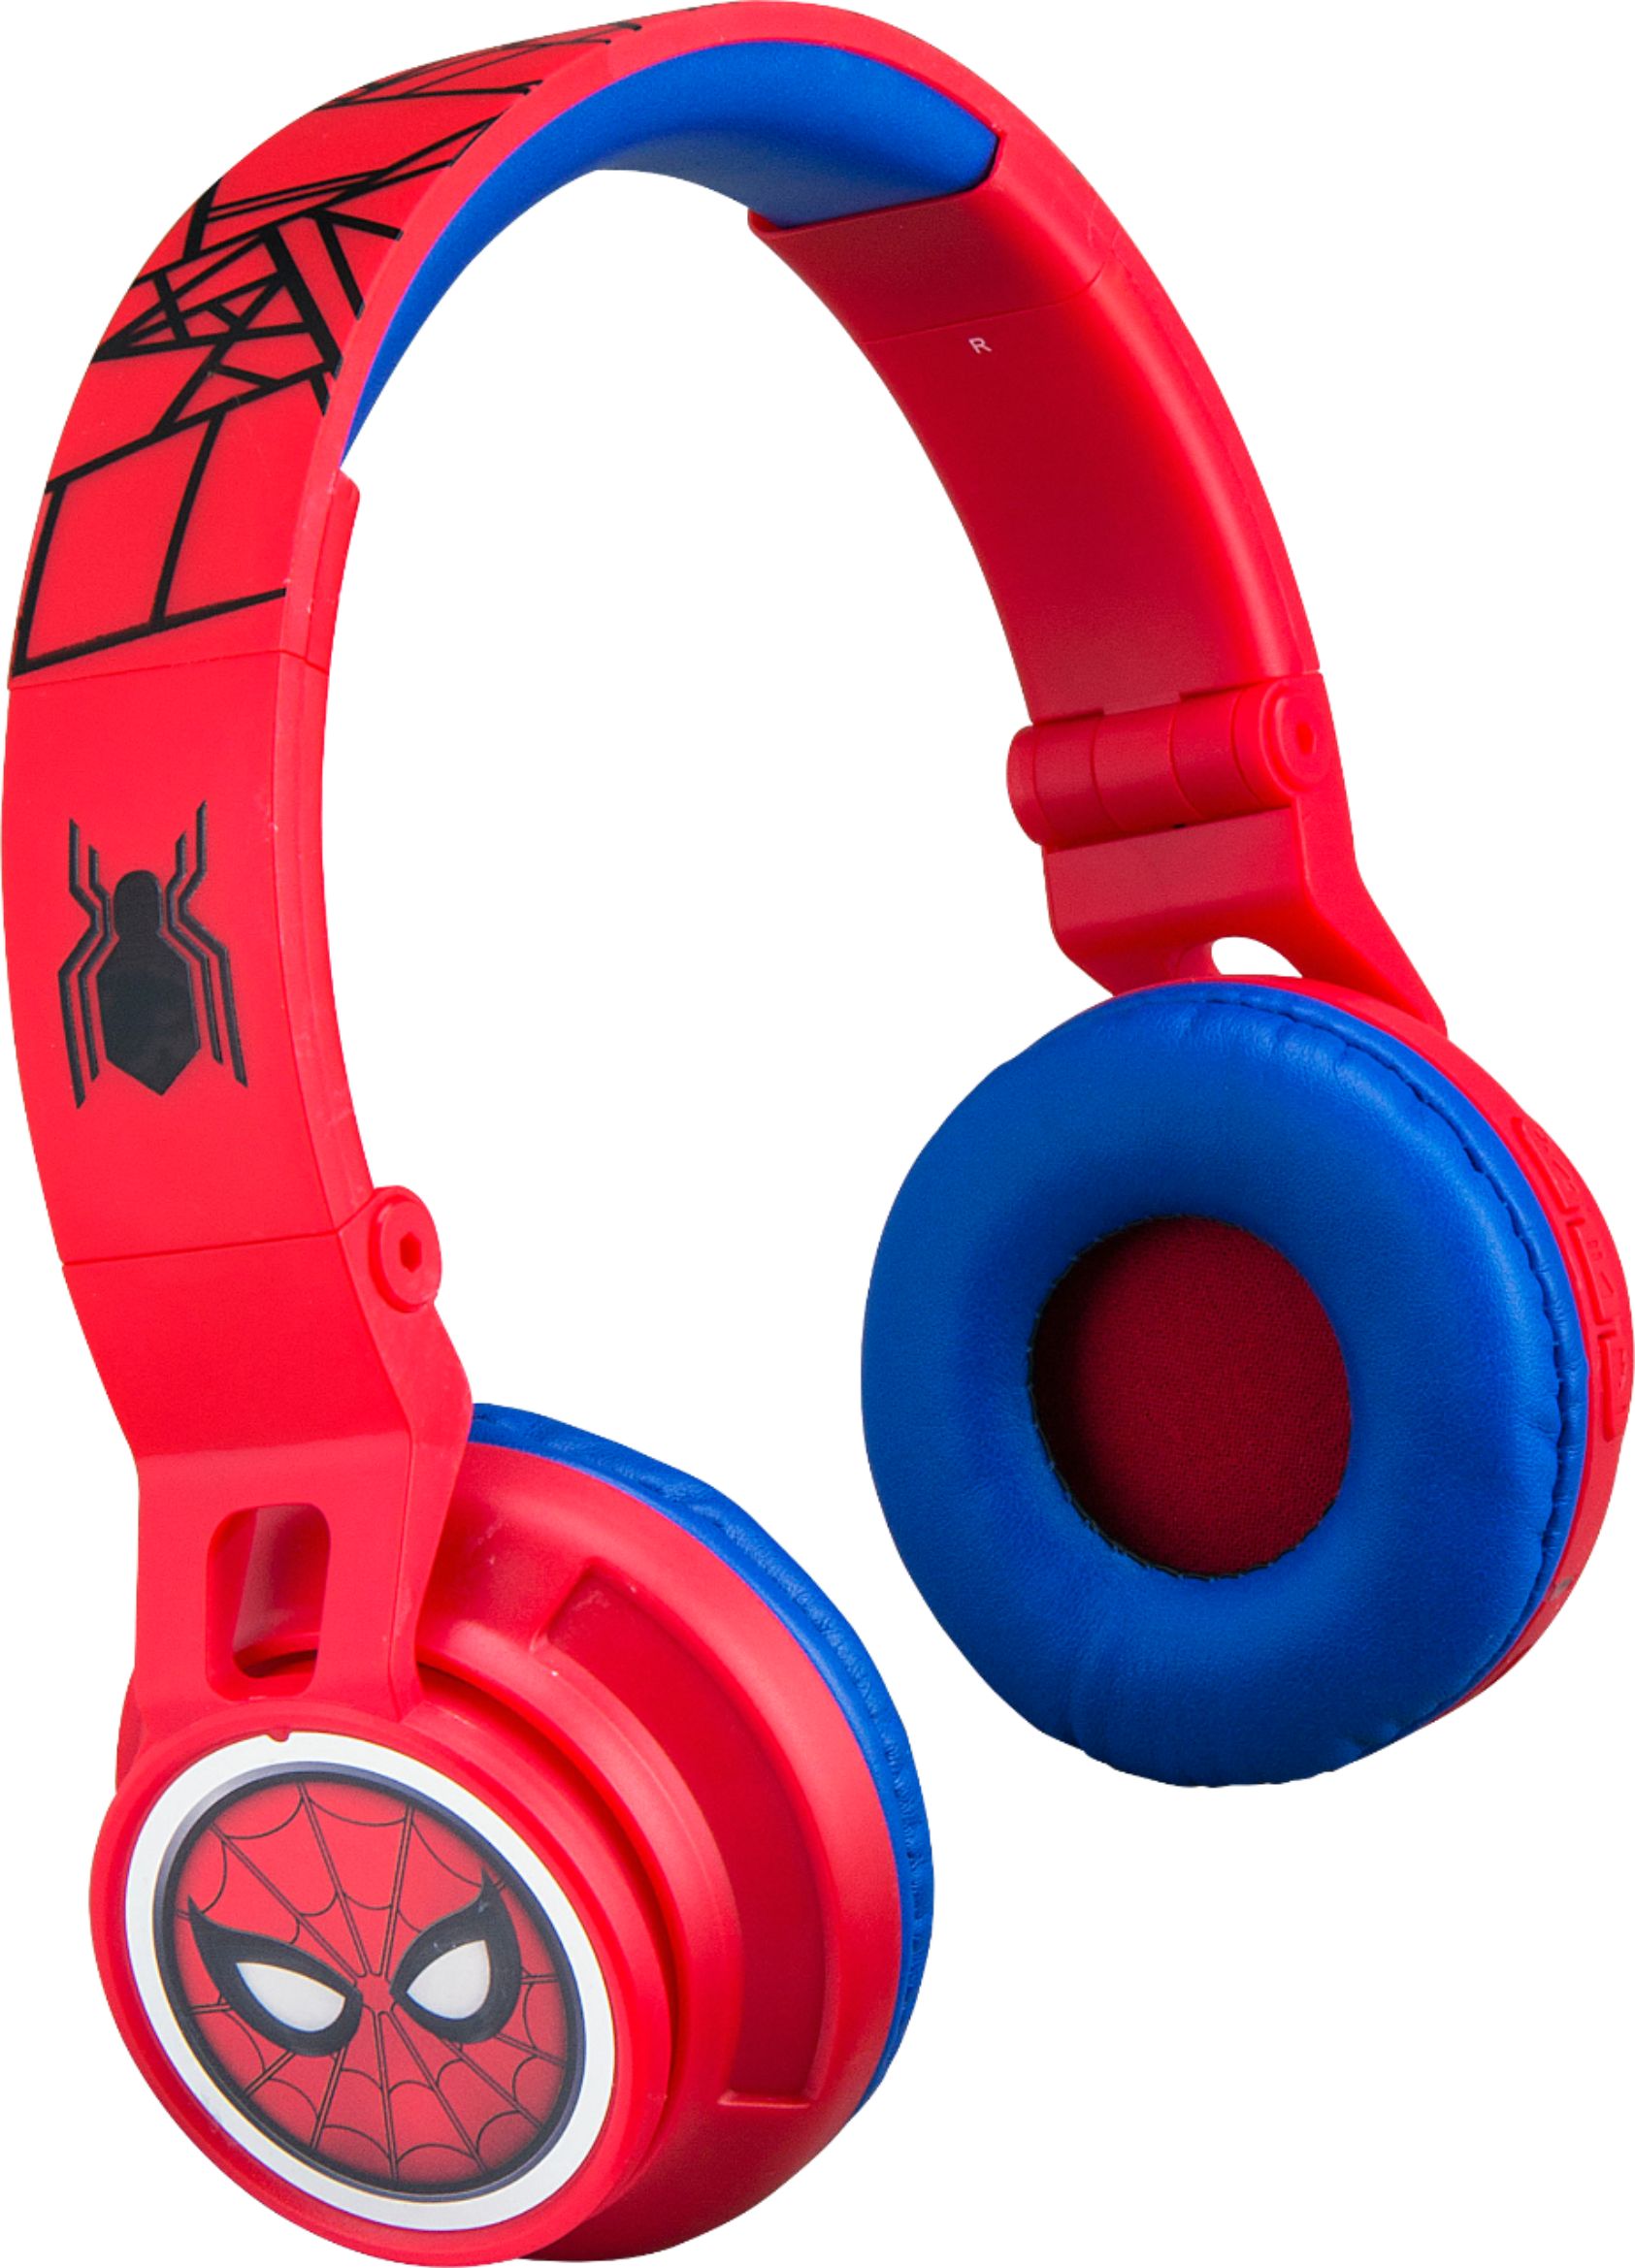 Angle View: eKids - Marvel Spider-Man Homecoming 2 Wireless On-Ear Headphones - Black/Red